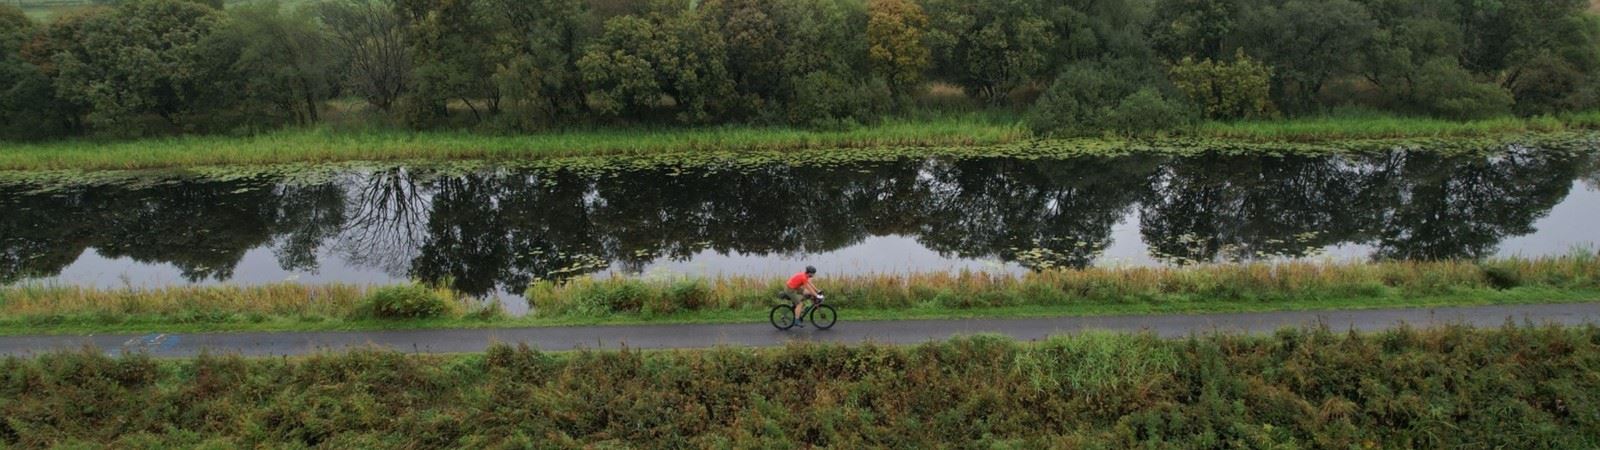 Canal Adventure Cycling By Markus Stitz